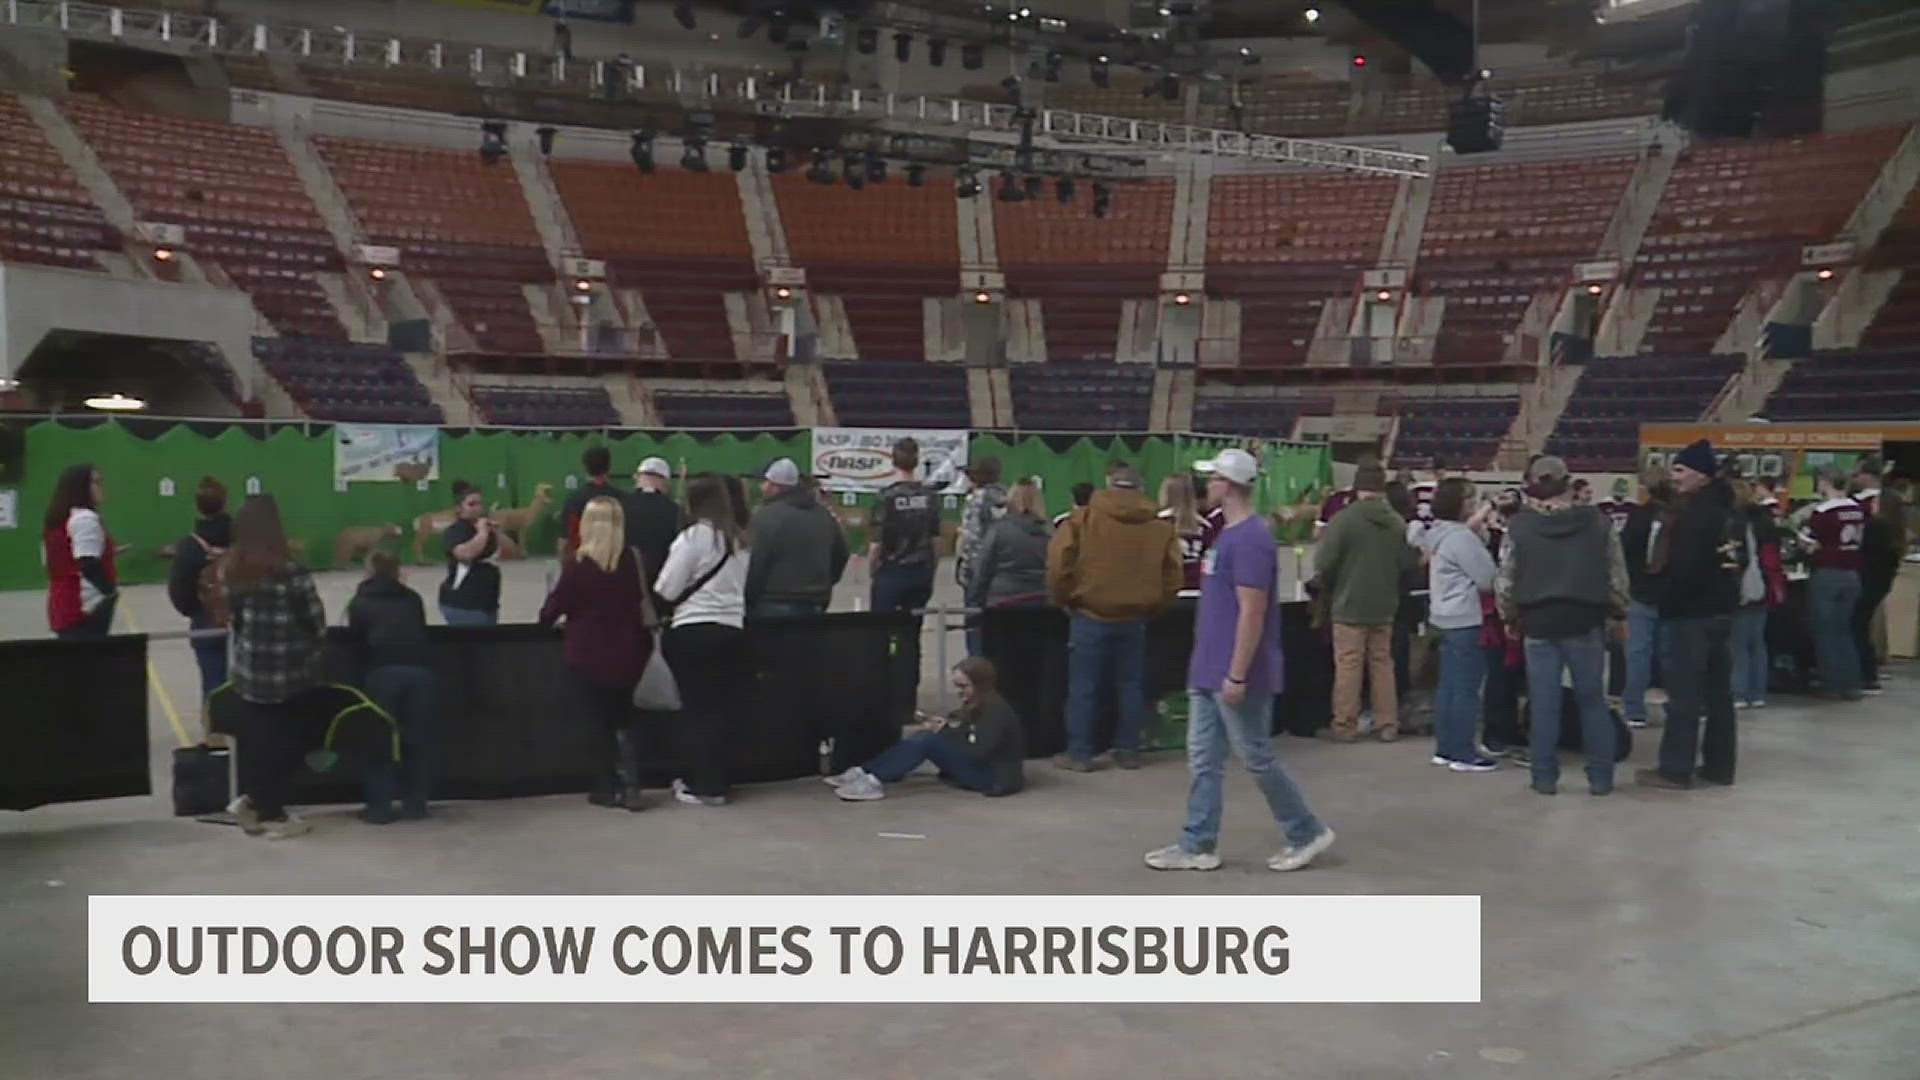 Thousands made their way to the Farm Show Complex, generating millions of dollars for Harrisburg.